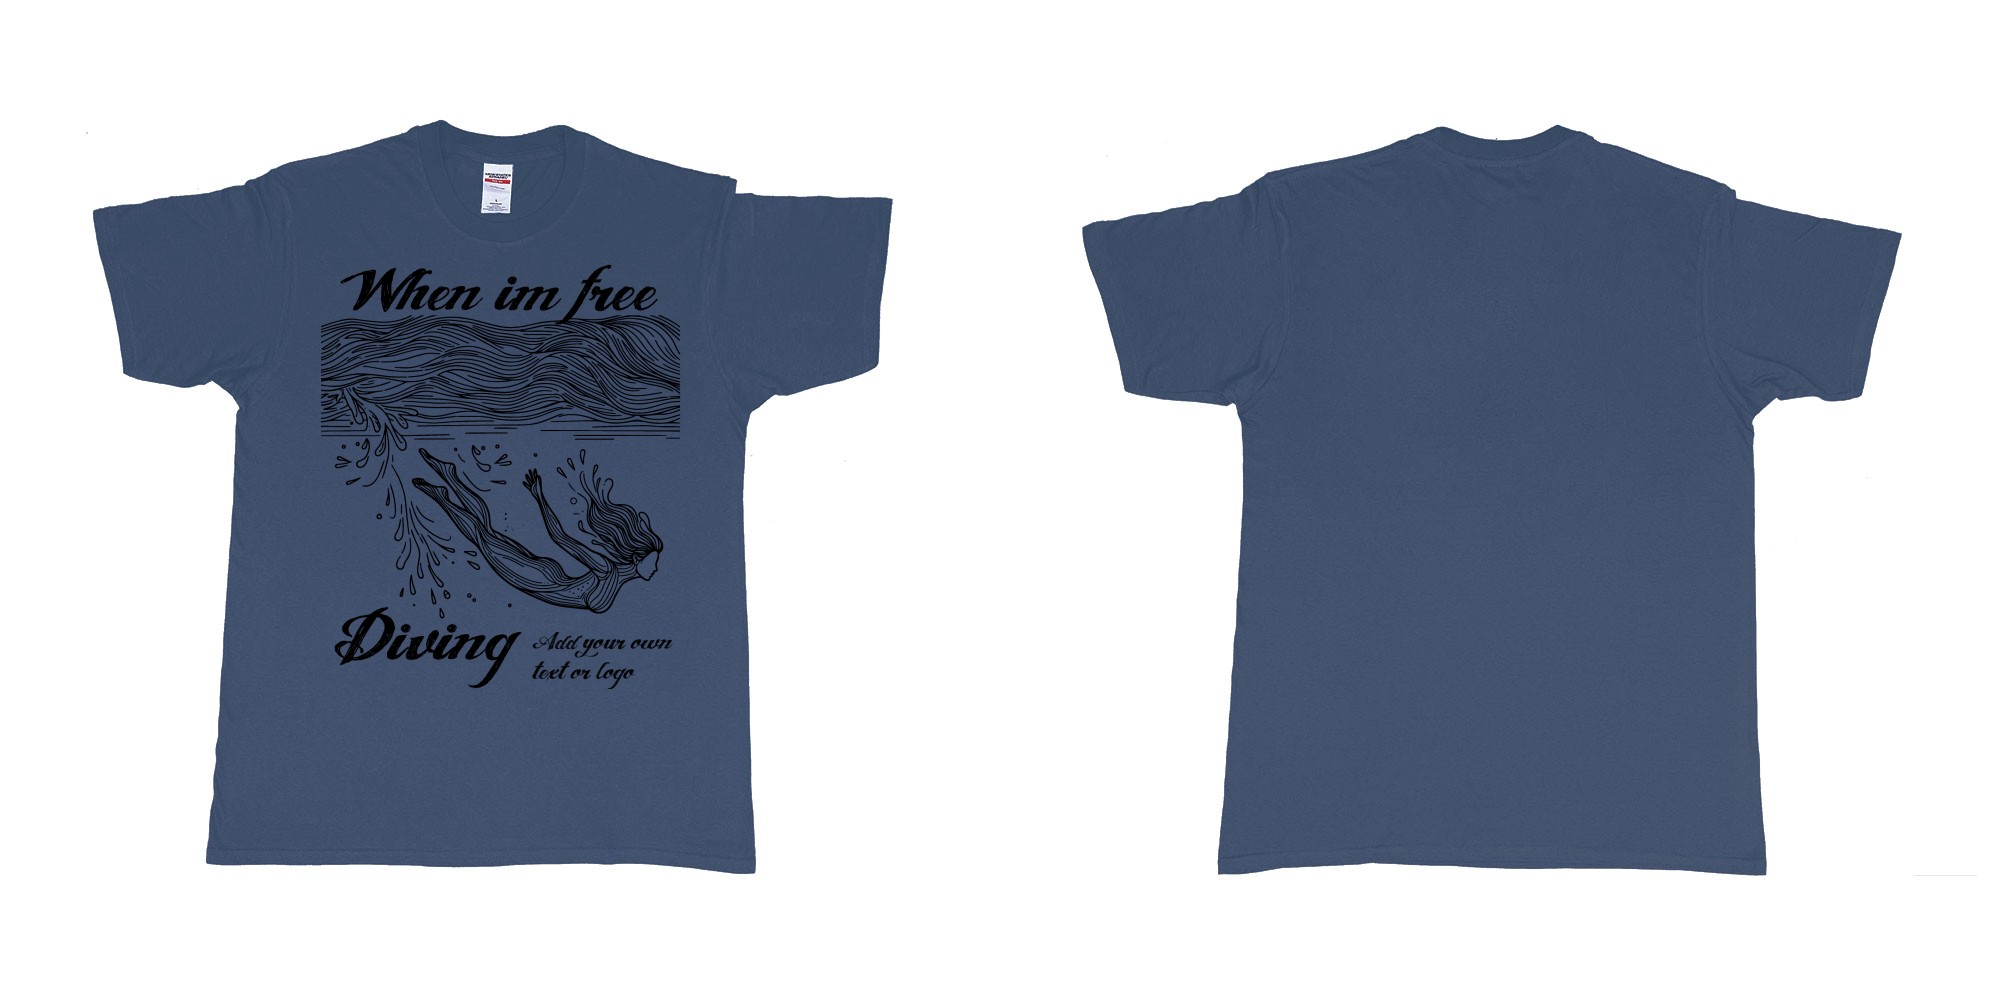 Custom tshirt design when im free diving add own text or logo in fabric color navy choice your own text made in Bali by The Pirate Way